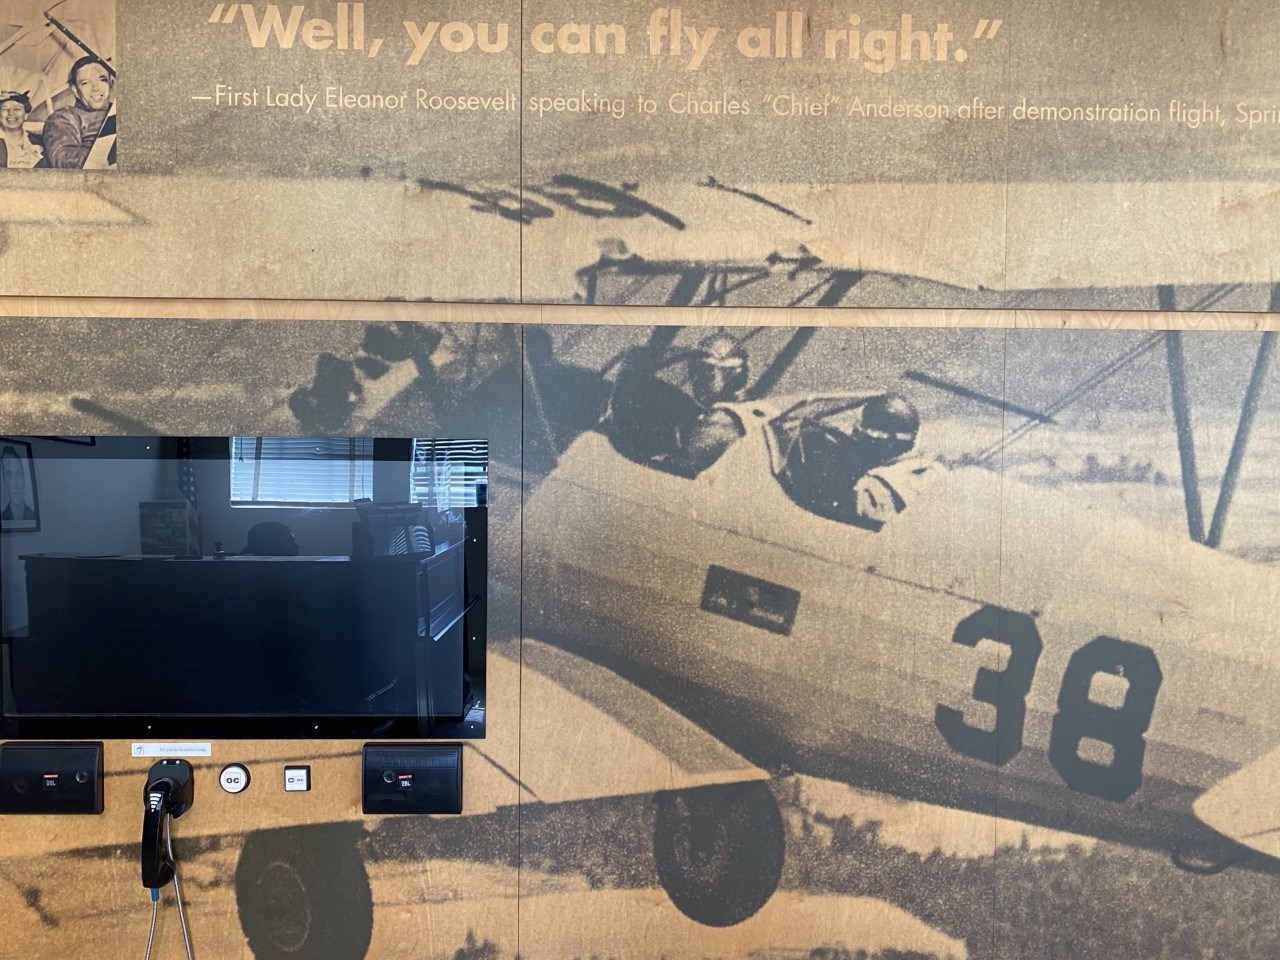 Picture and quotation from Eleanor Roosevelt’s visit. "Well, you can fly alright" is written and shown with an airplane